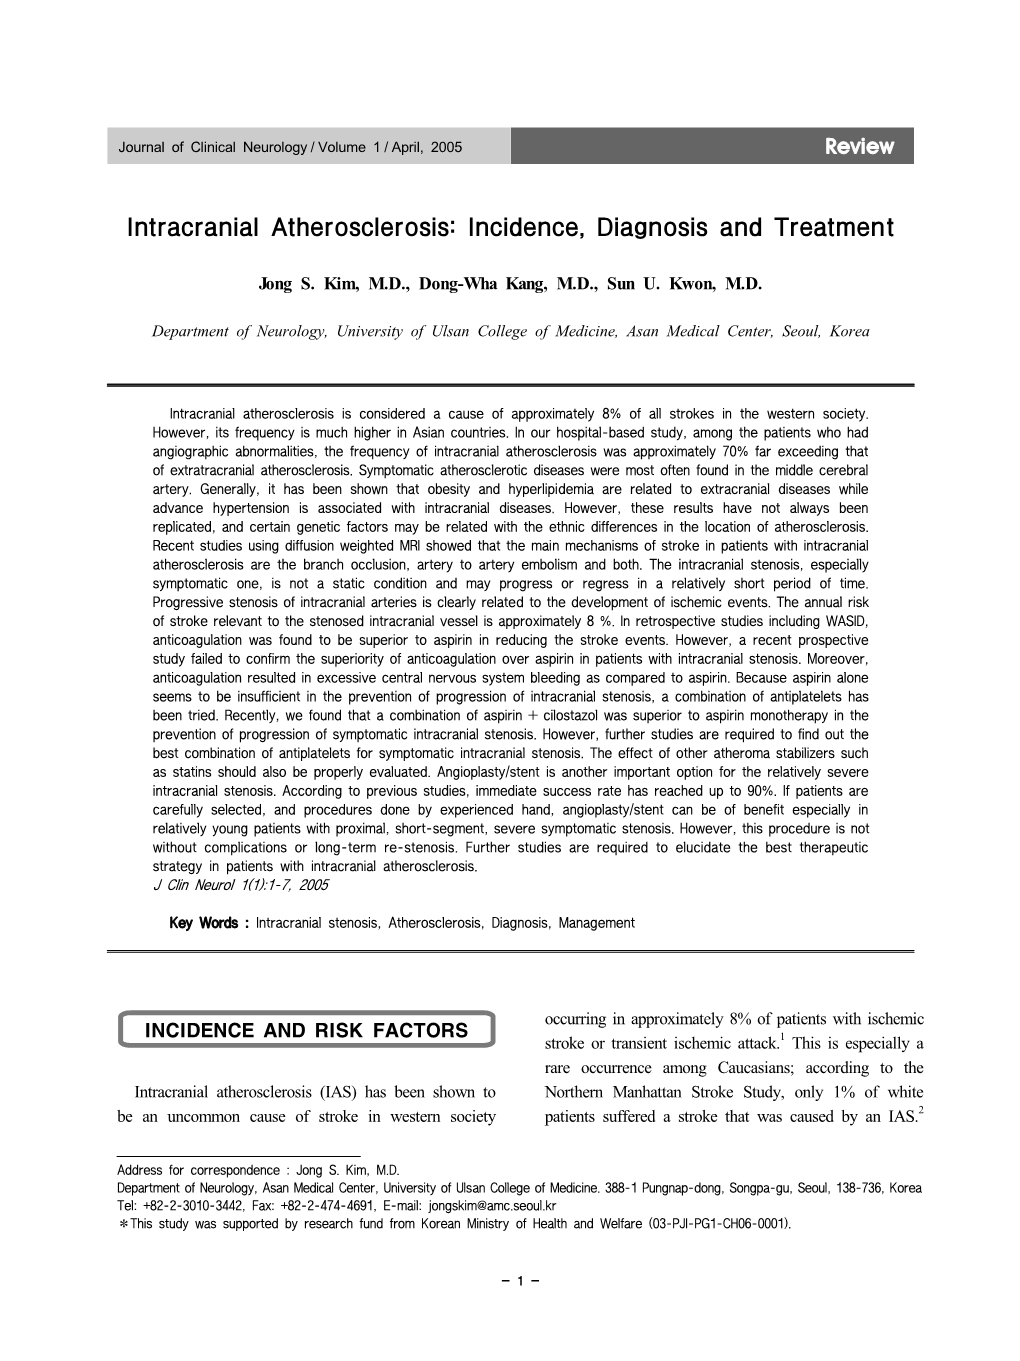 Intracranial Atherosclerosis: Incidence, Diagnosis and Treatment